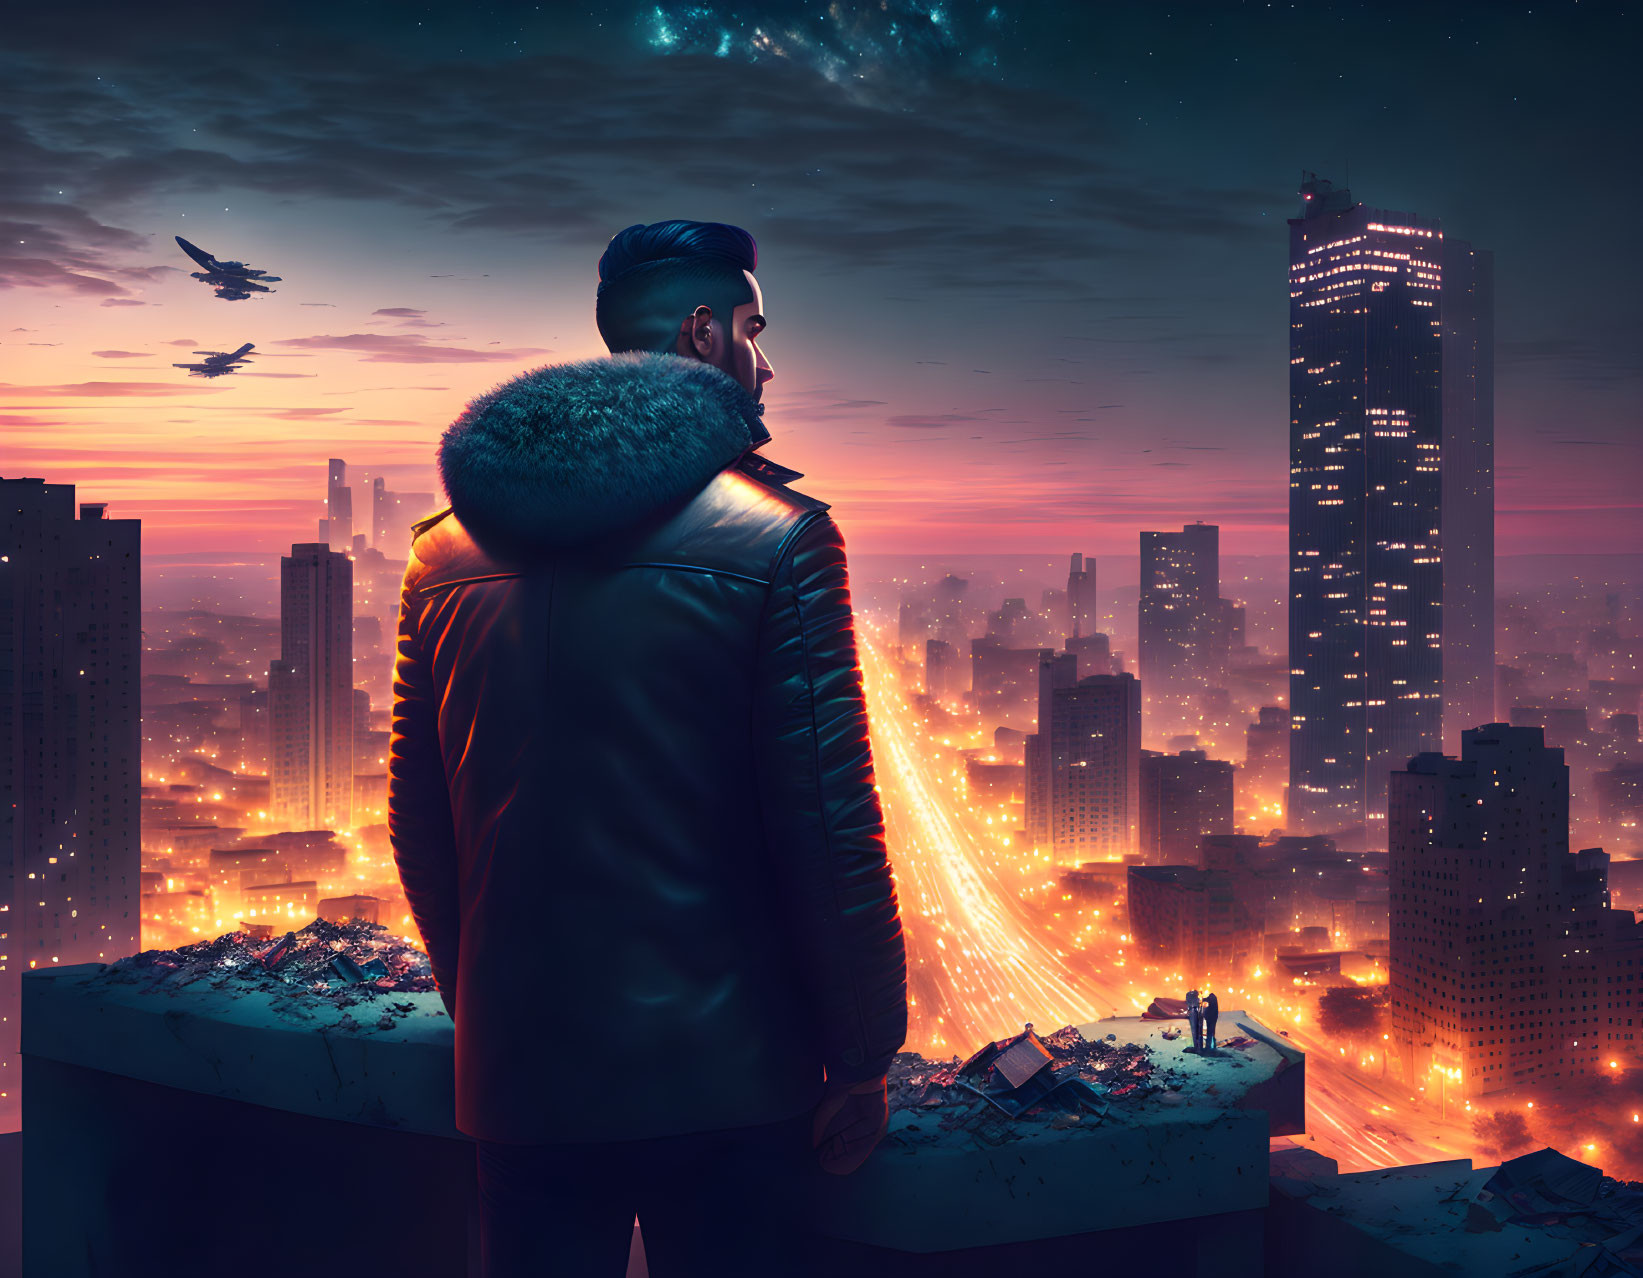 Man in leather jacket gazes at futuristic cityscape at dusk